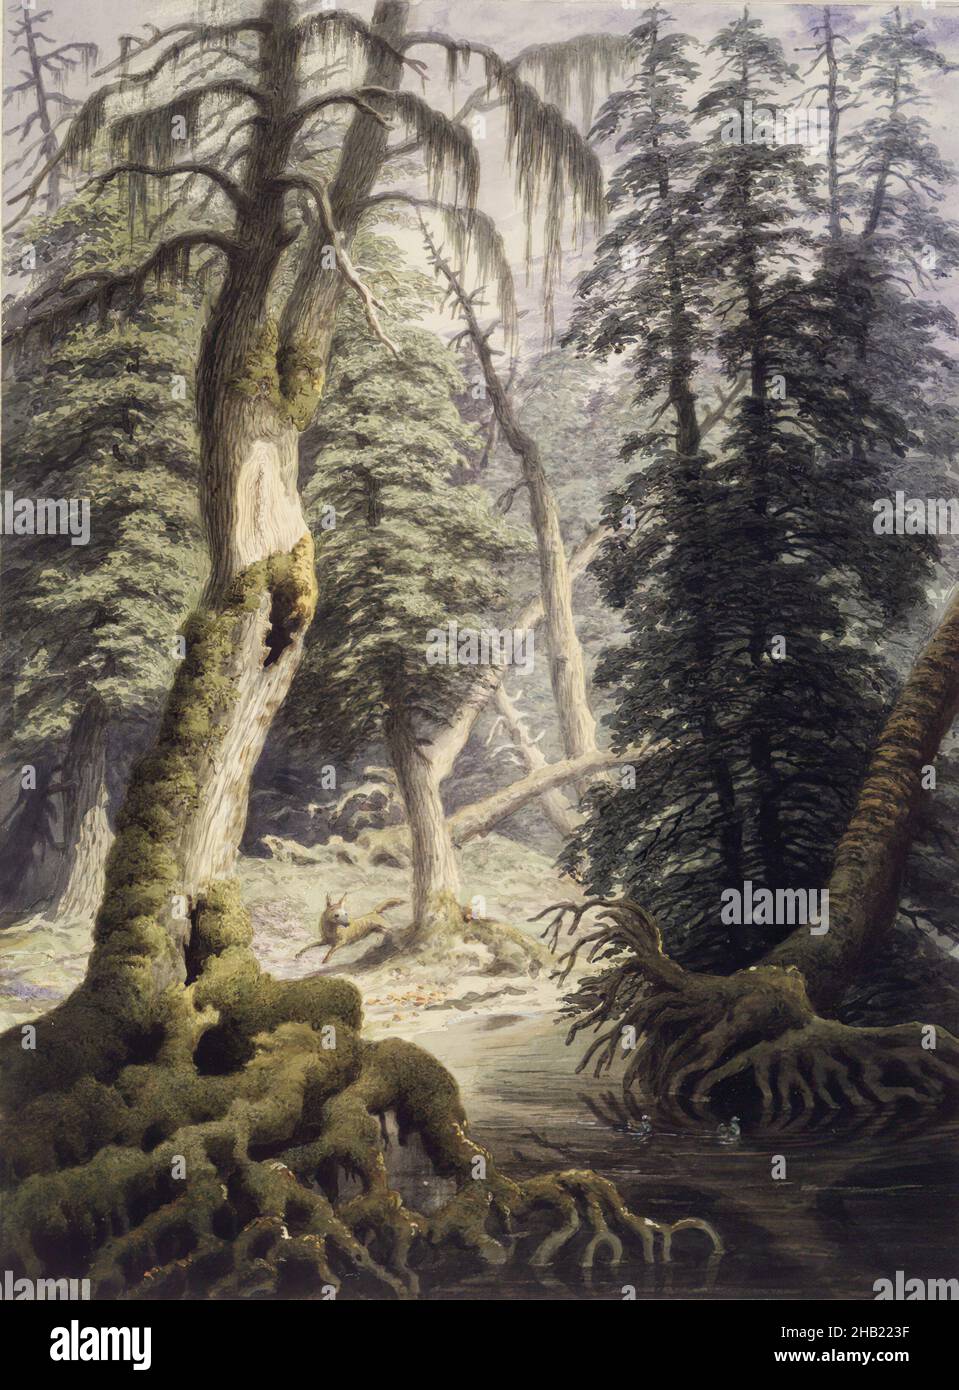 A Cedar Swamp, George Harvey, American, 1801-1878, Watercolor, Bald Cypress, Bayou, damp, ducks, forest, fox, hunt, roots, Southern, Spanish Moss, Taxodium distichum, the South, wetlands Stock Photo